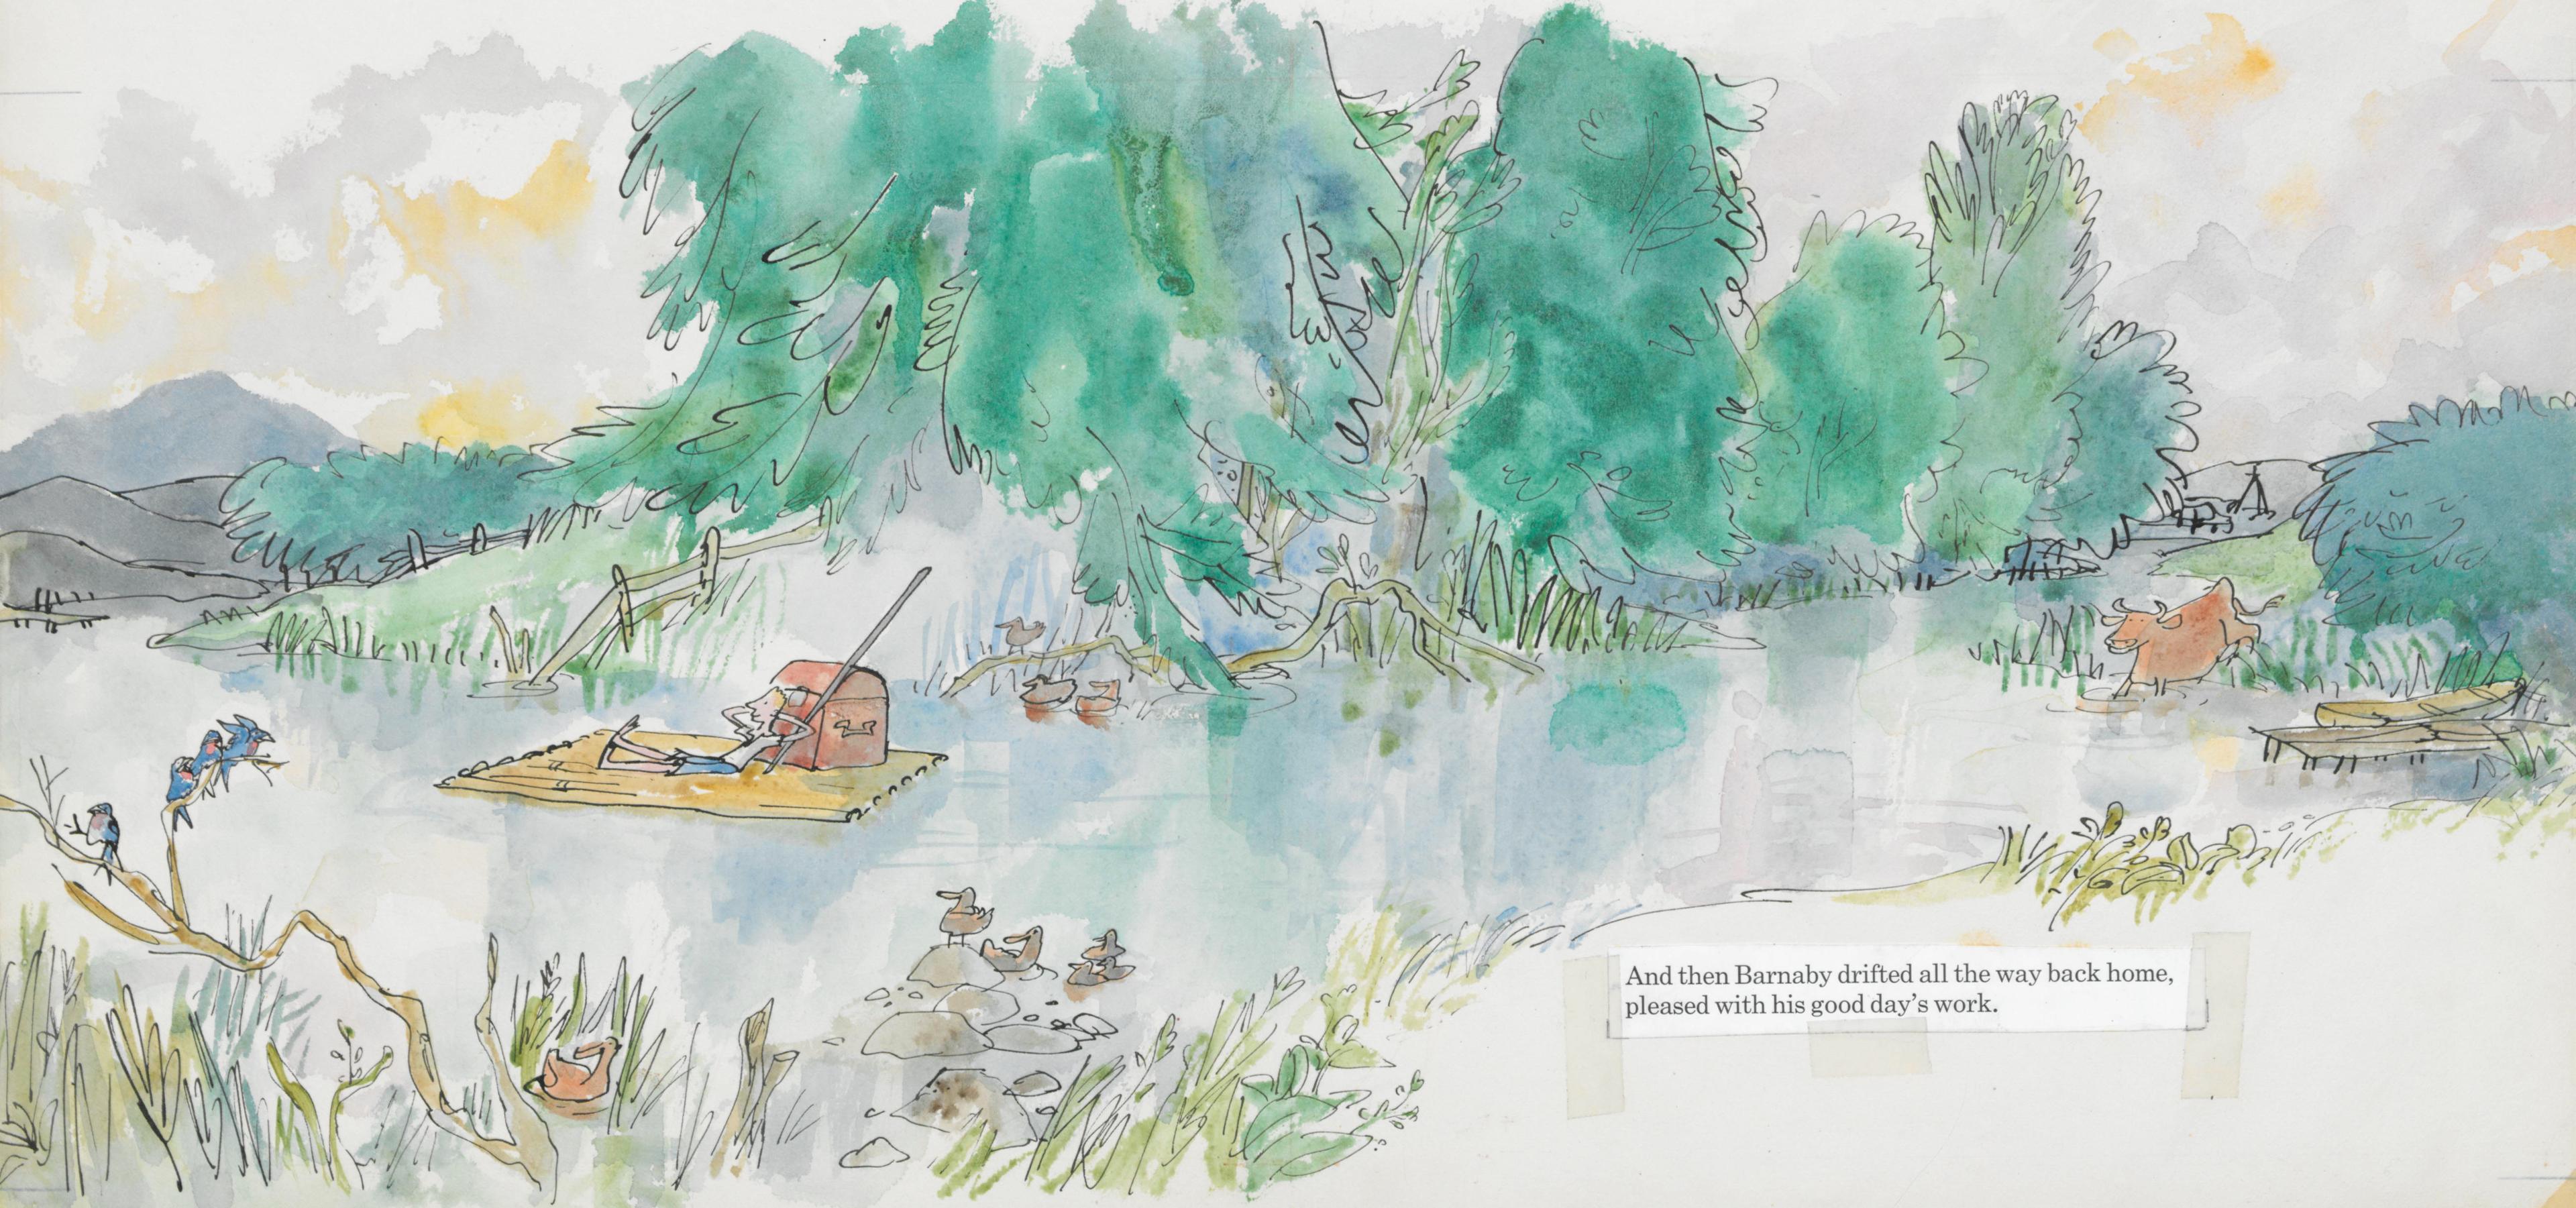 Illustration of a river with greenery on its banks and a person lying on a floating raft and the words 'And then Barnaby drifted all the way back home, pleased with his good day's work'